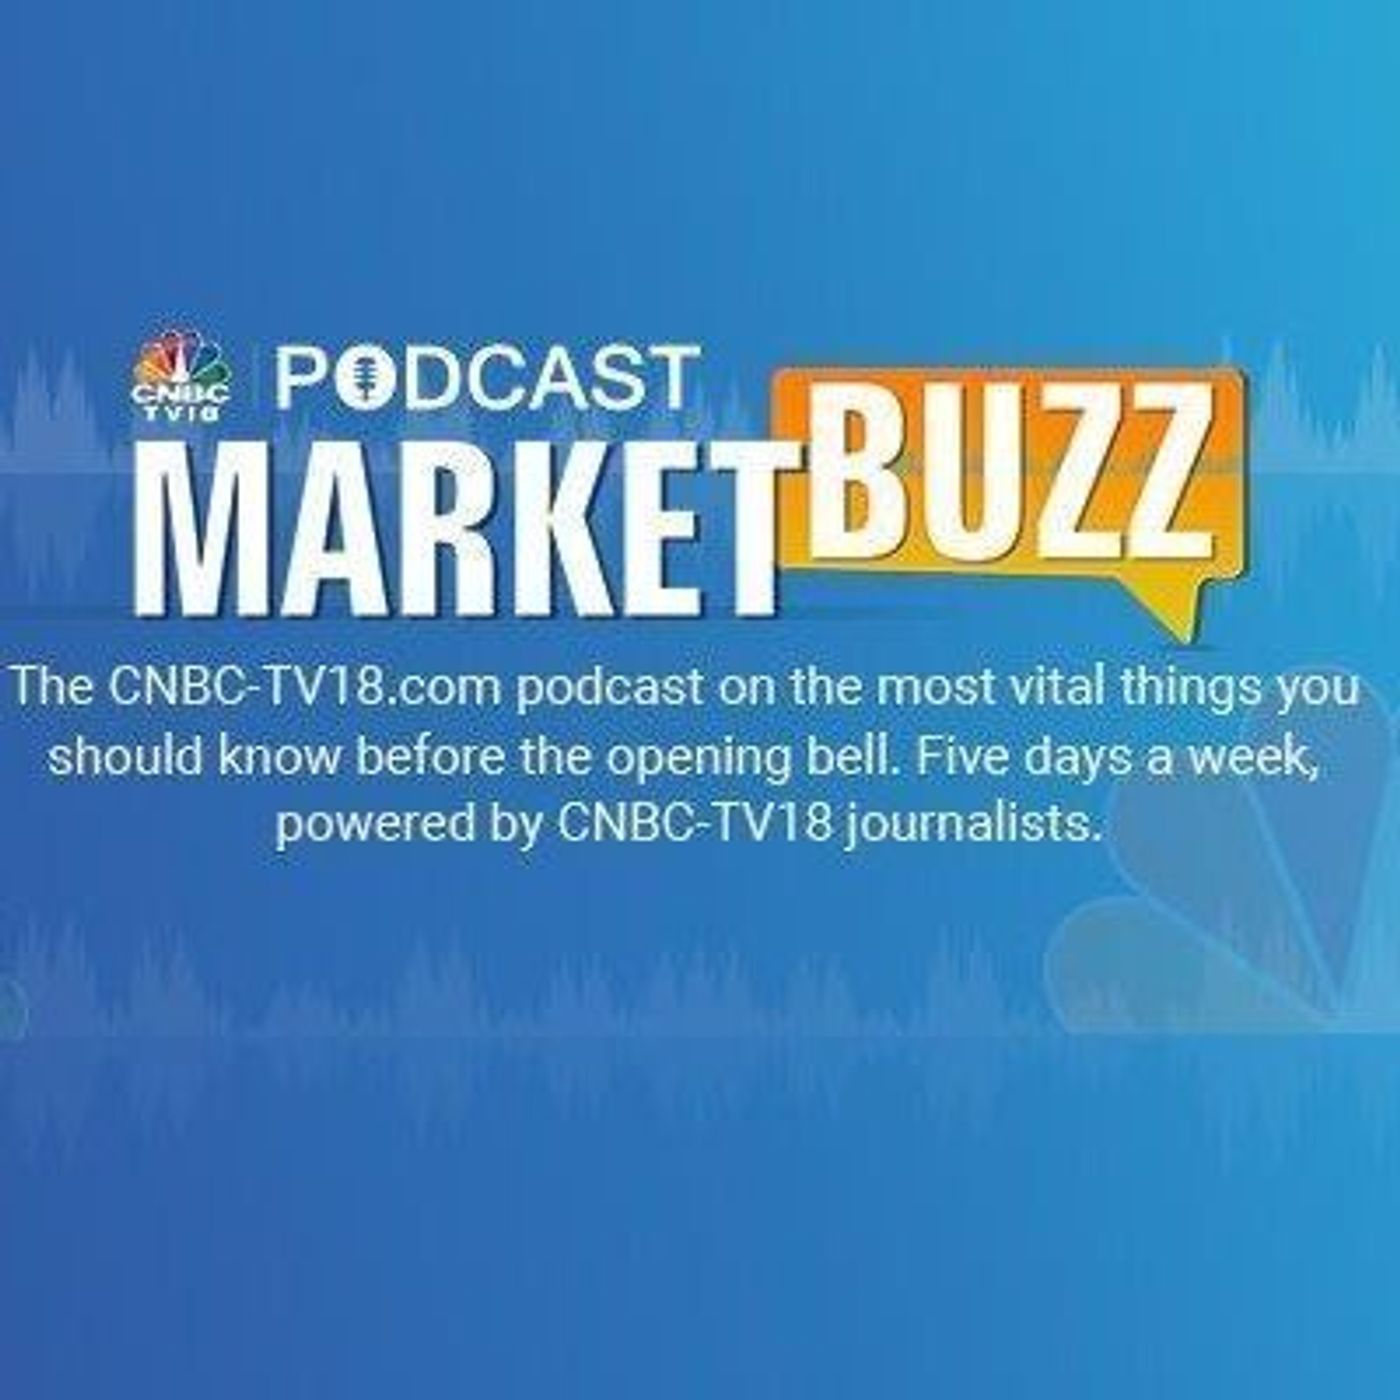 1242: Marketbuzz Podcast With Hormaz Fatakia: Nifty Bank near 50,000; BSE, Tata Chemicals in focus